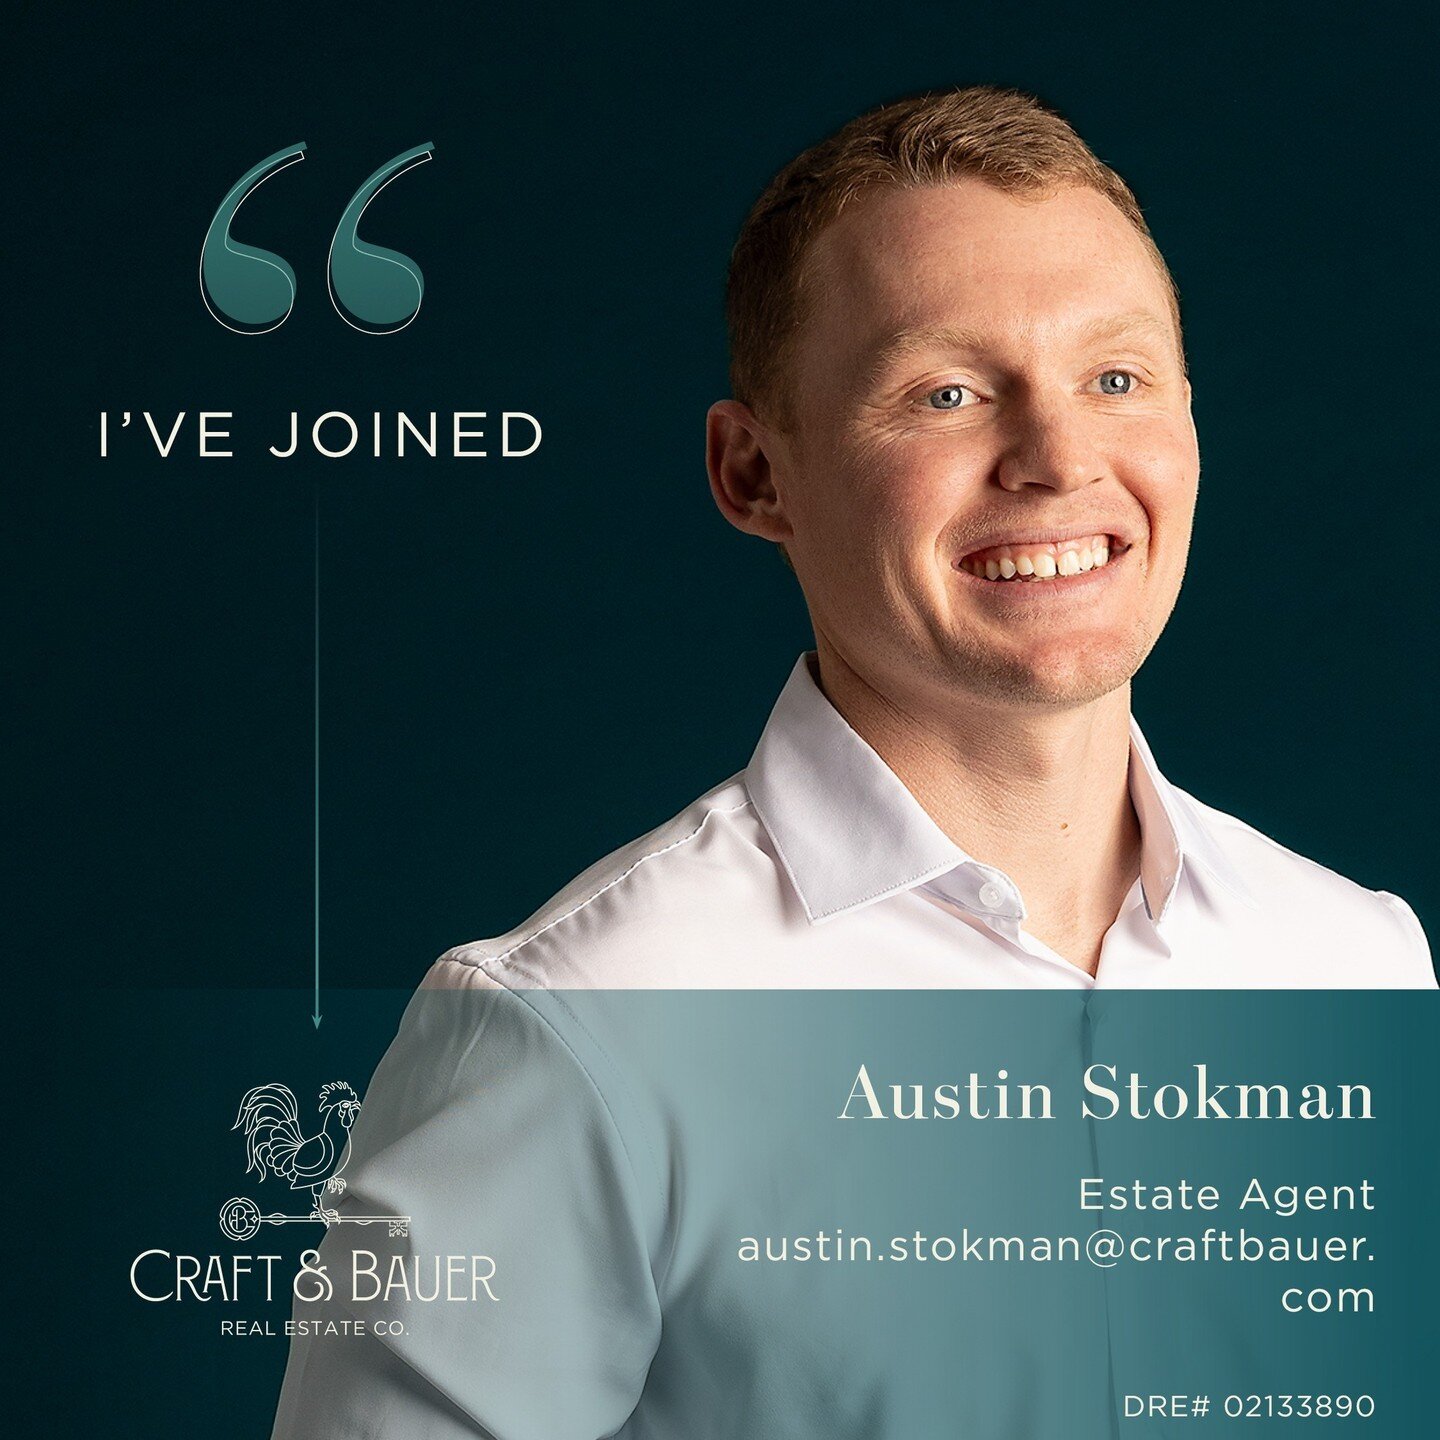 Please join us in welcoming Austin Stokman to @craftbauer as Estate Agent, and the latest member of our Northern California office! 🎉⁠
⁠
When contemplating buying, selling or investing in real estate there are a lot of complex situations and moving 